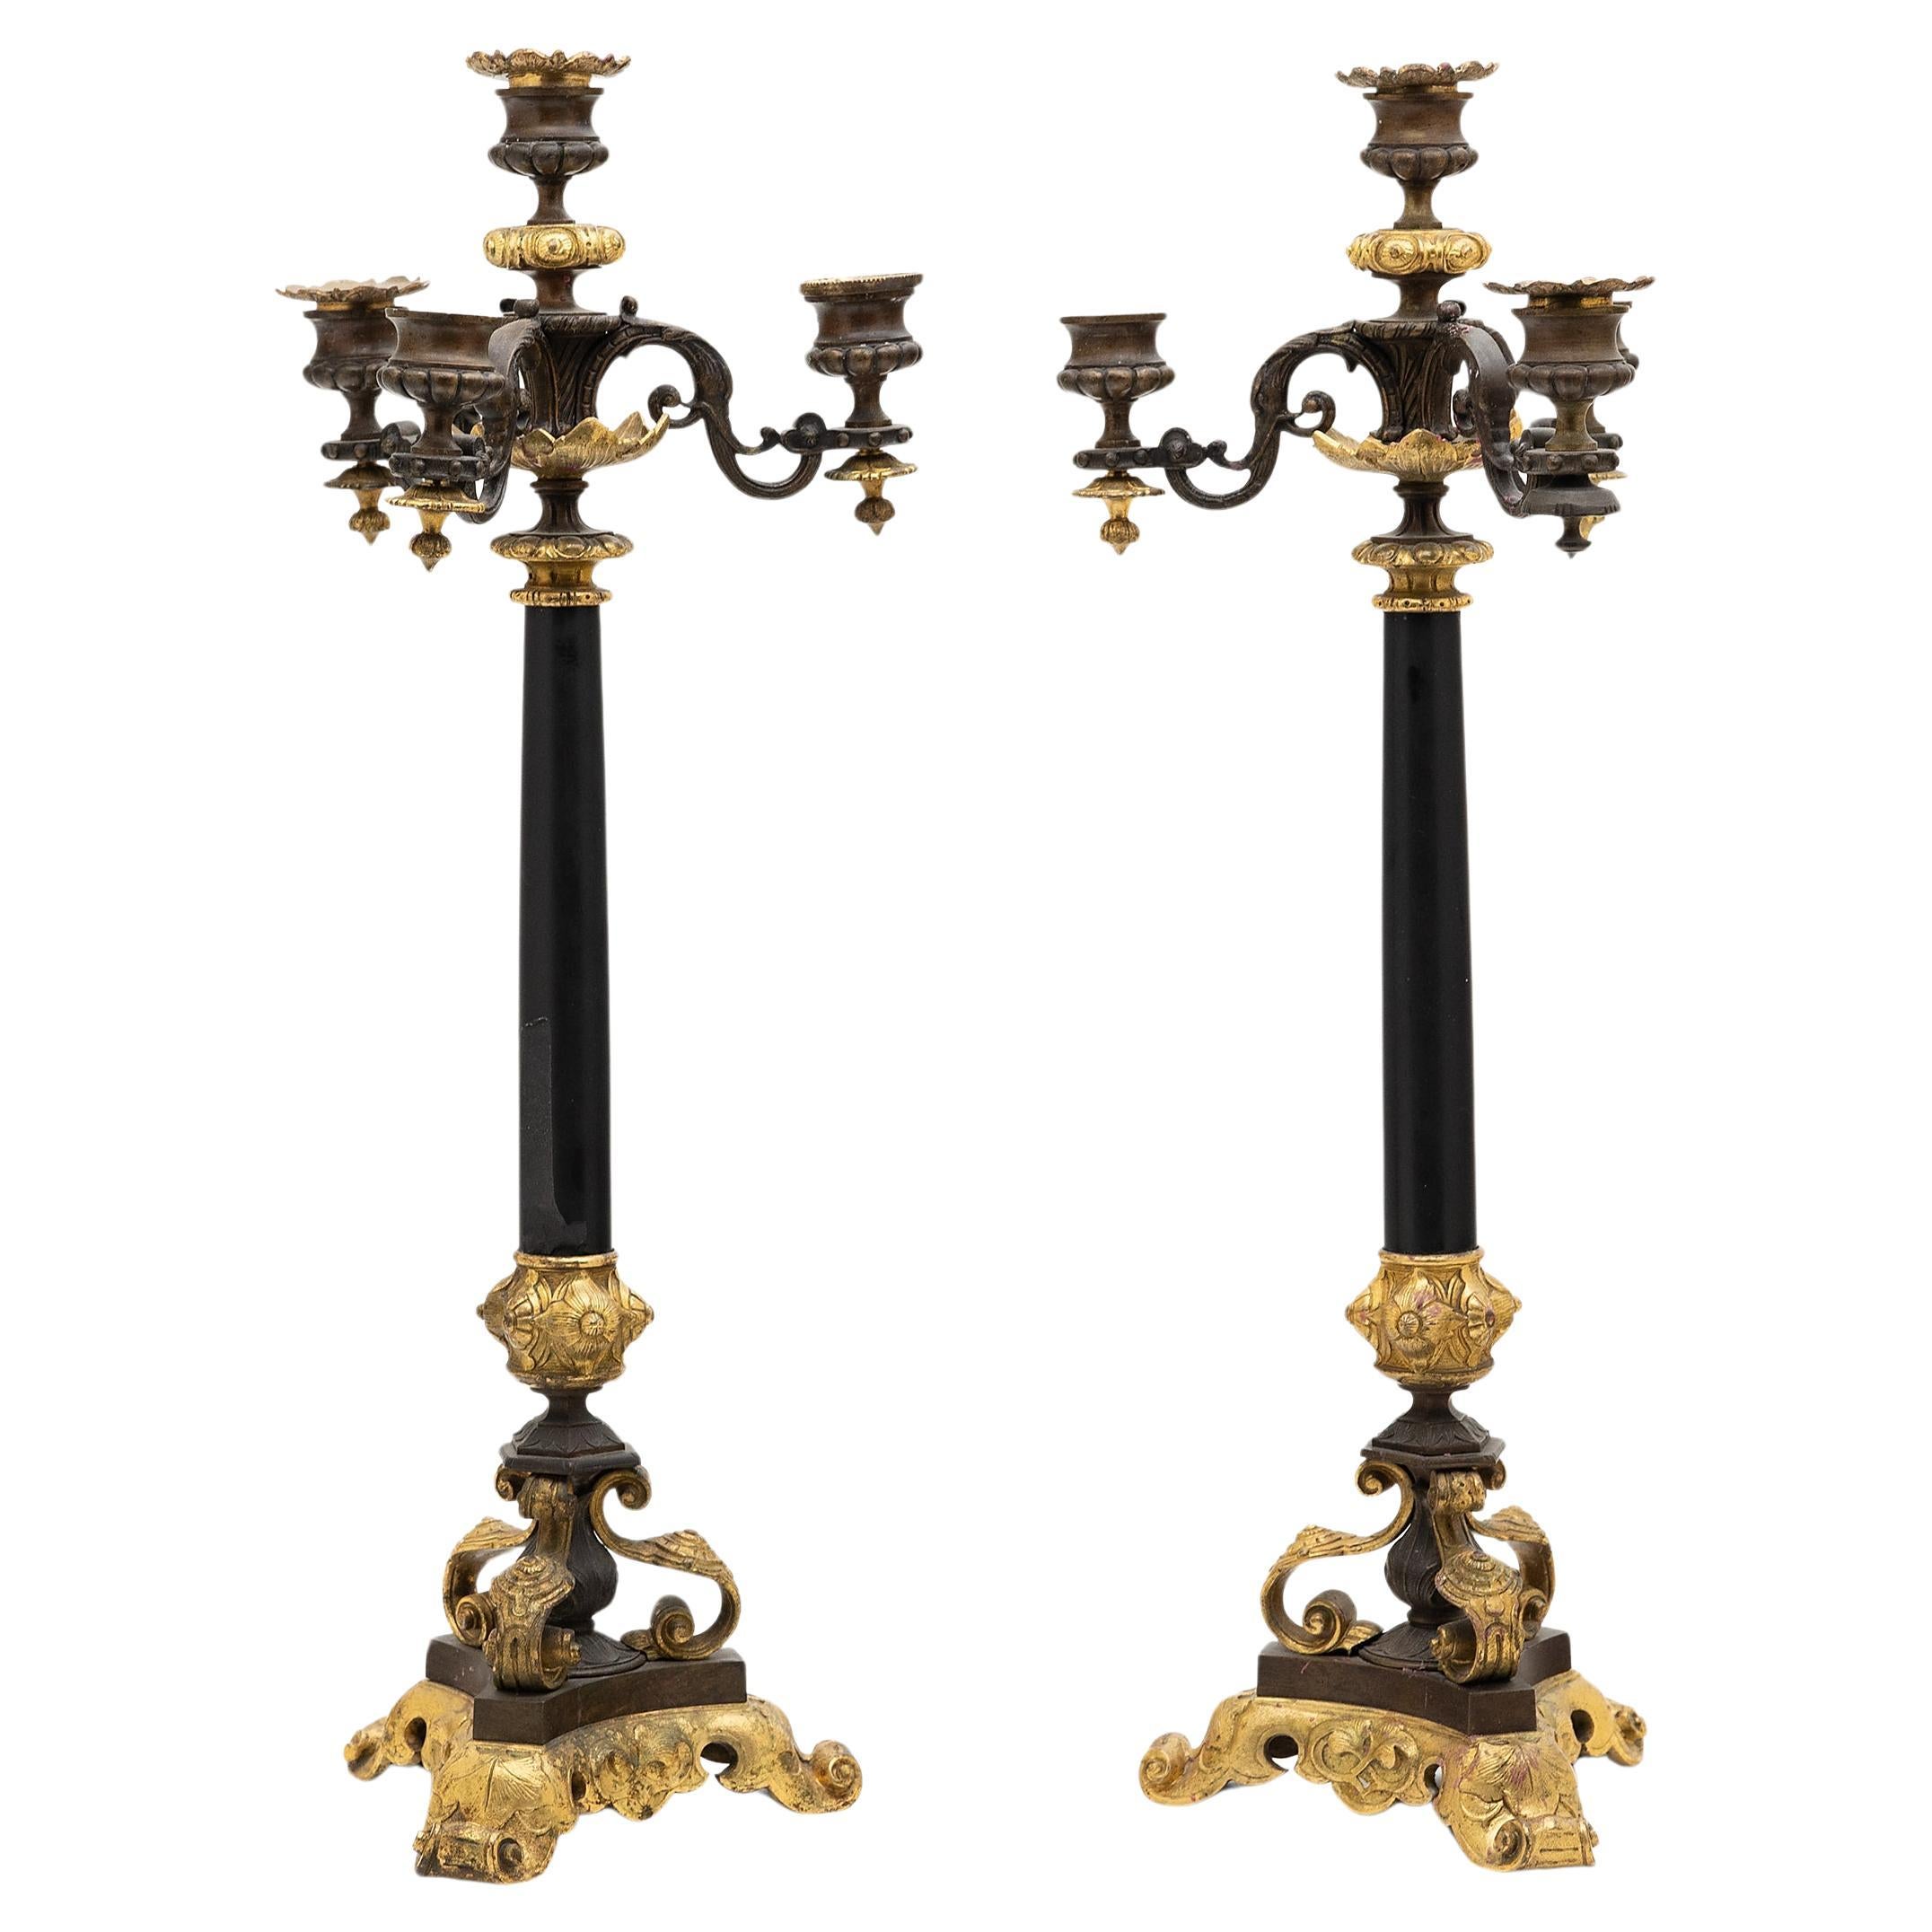 Pair of French Gilt Bronze and Slate Candelabras, c. 1850 For Sale